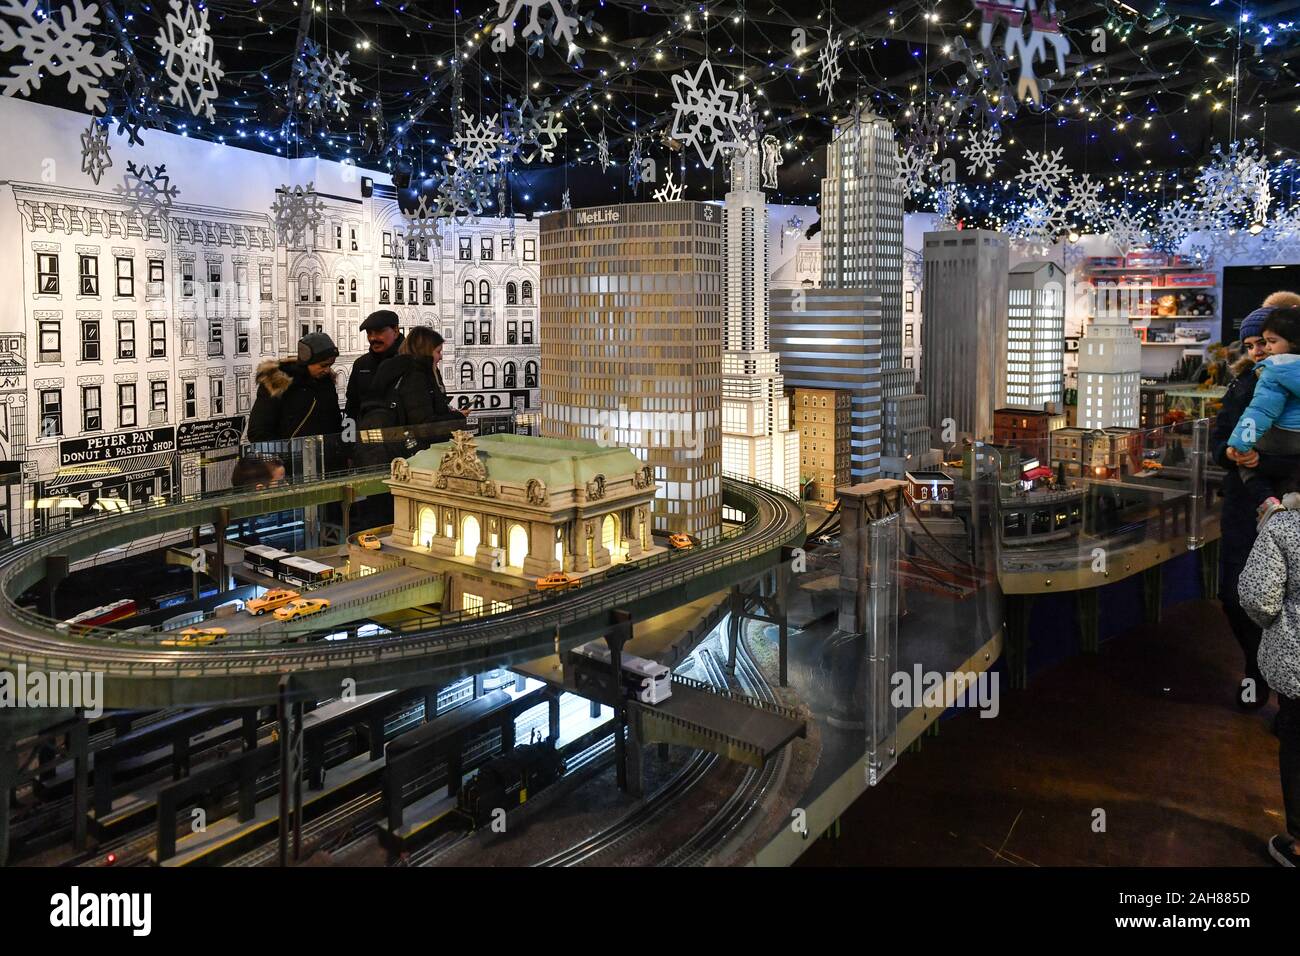 The Holiday Train Show at the New York Transit Museum in Grand Central Terminal. The Transit Museum’s display features Lionel trains traveling along a Stock Photo